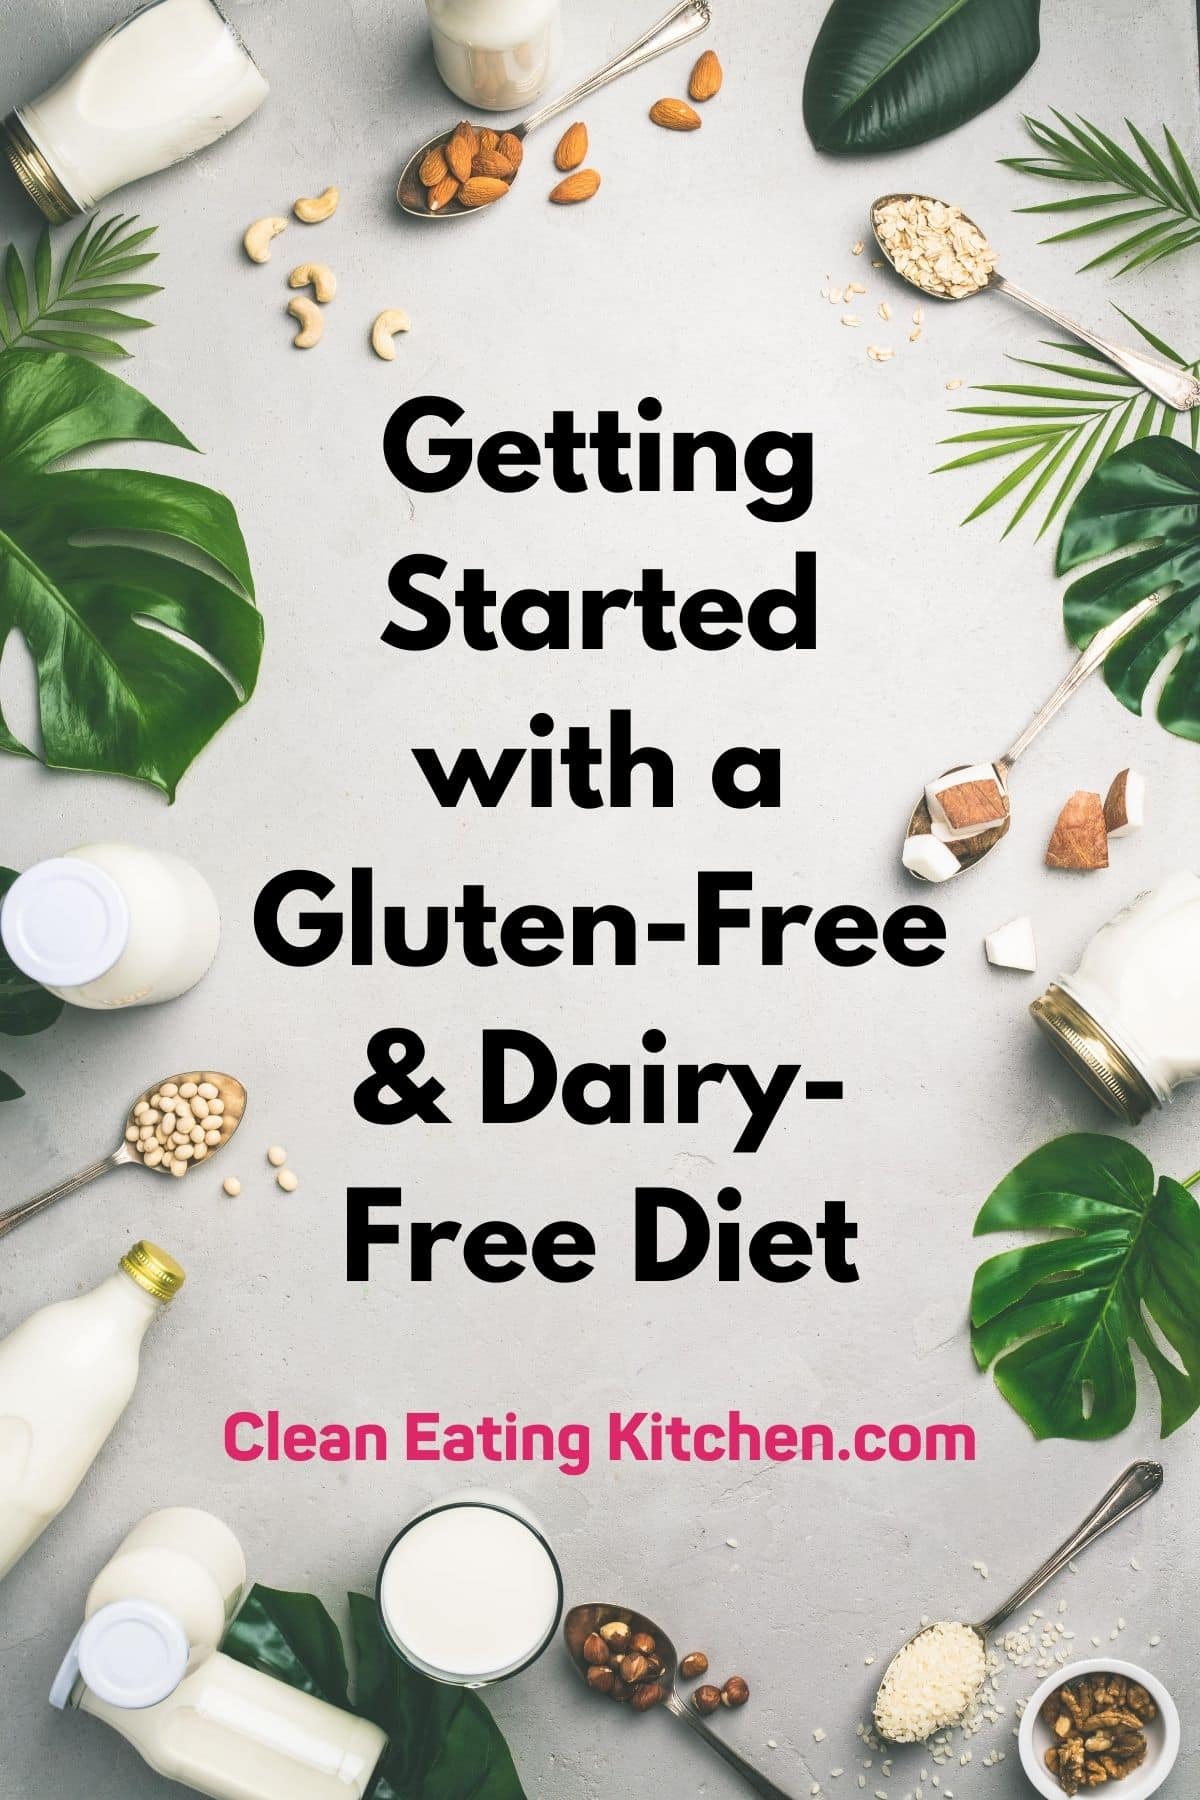 infographic with tips for getting started with a gluten-free and dairy-free diet.